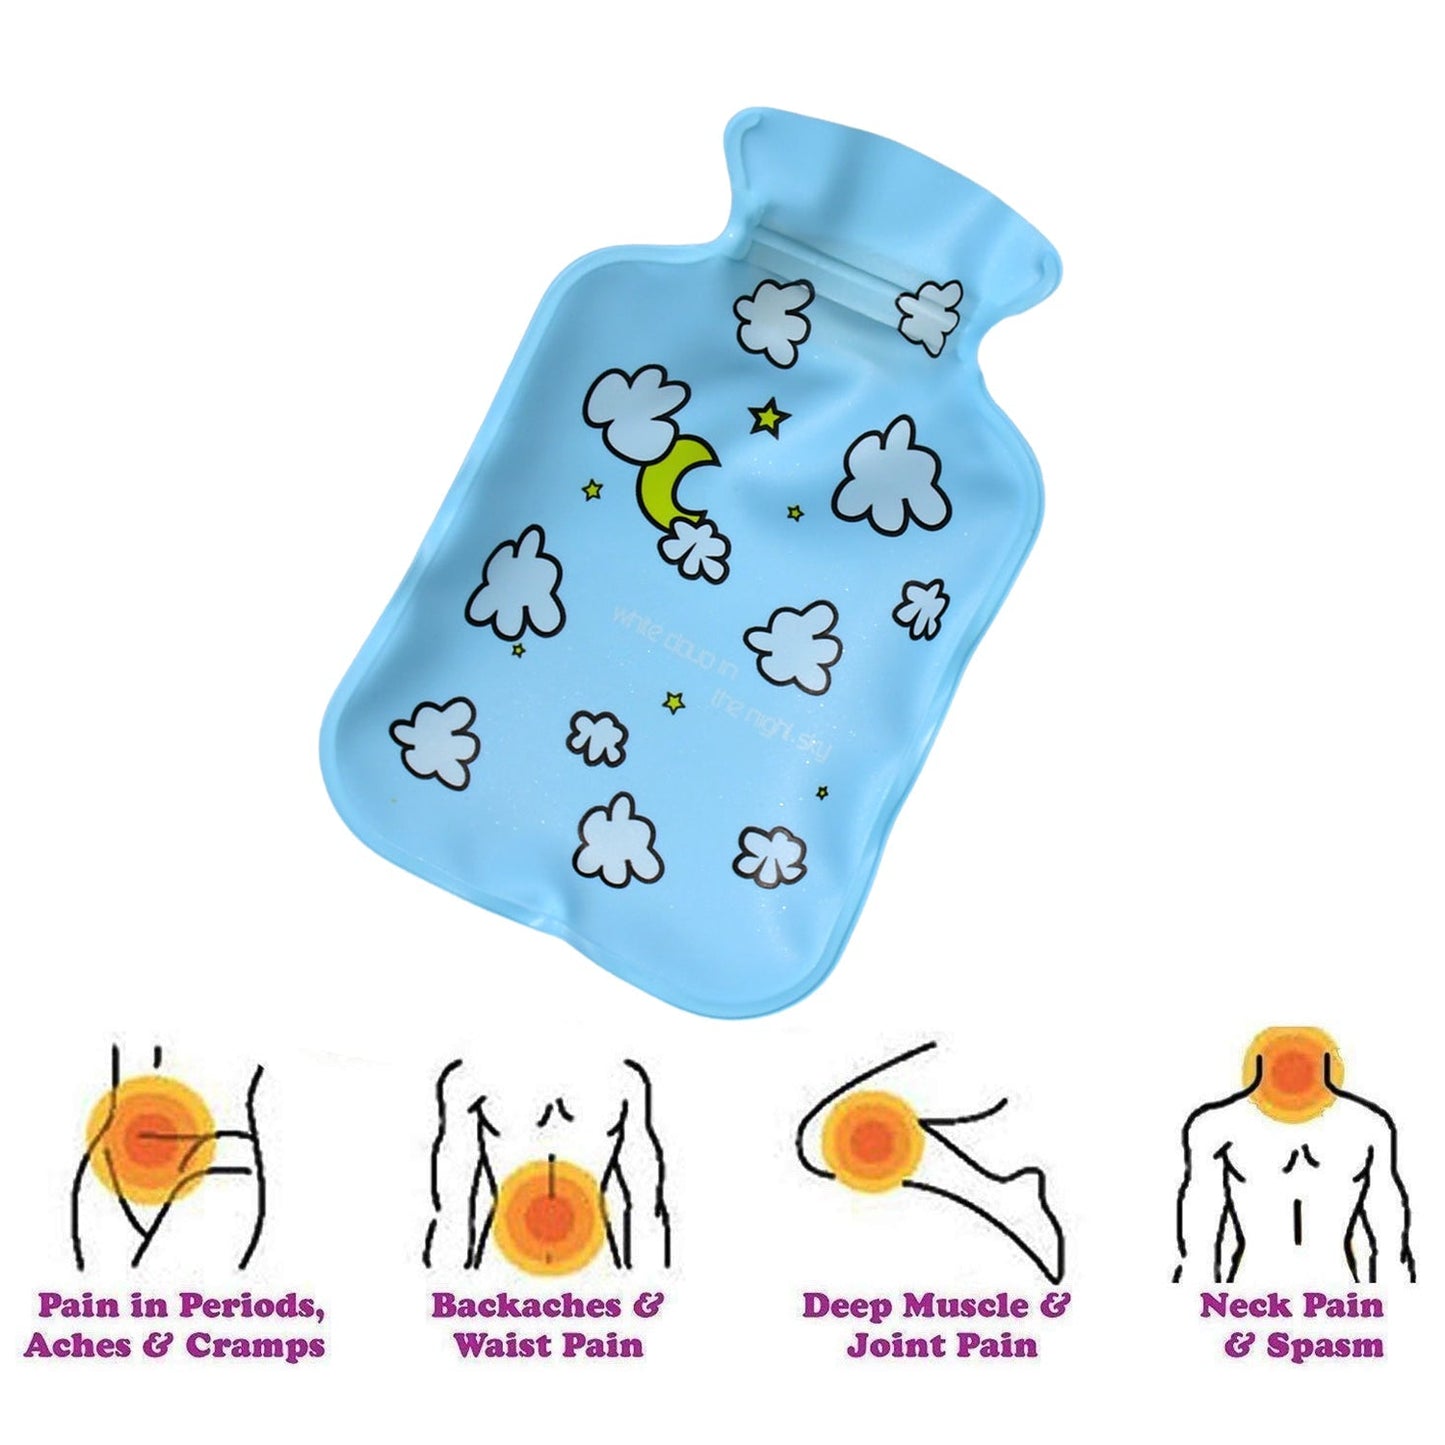 6536 1pc Mix designs Small Hot Water Bag with Cover for Pain Relief, Neck, Shoulder Pain and Hand, Feet Warmer, Menstrual Cramps. DeoDap